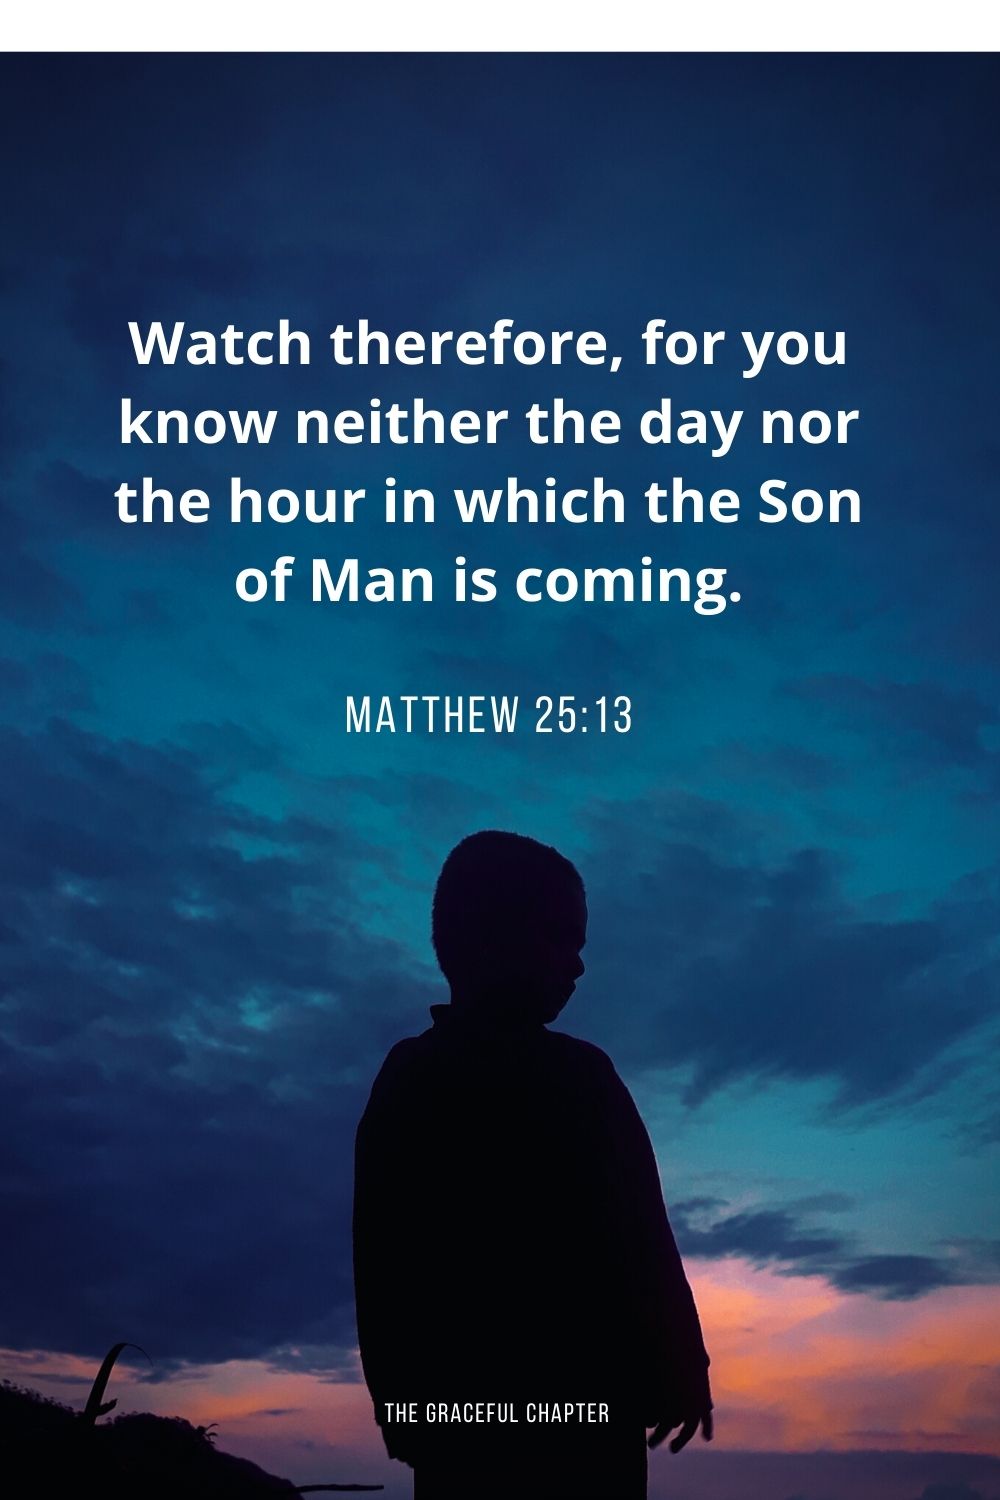 “Watch therefore, for you know neither the day nor the hour in which the Son of Man is coming. Matthew 25:13